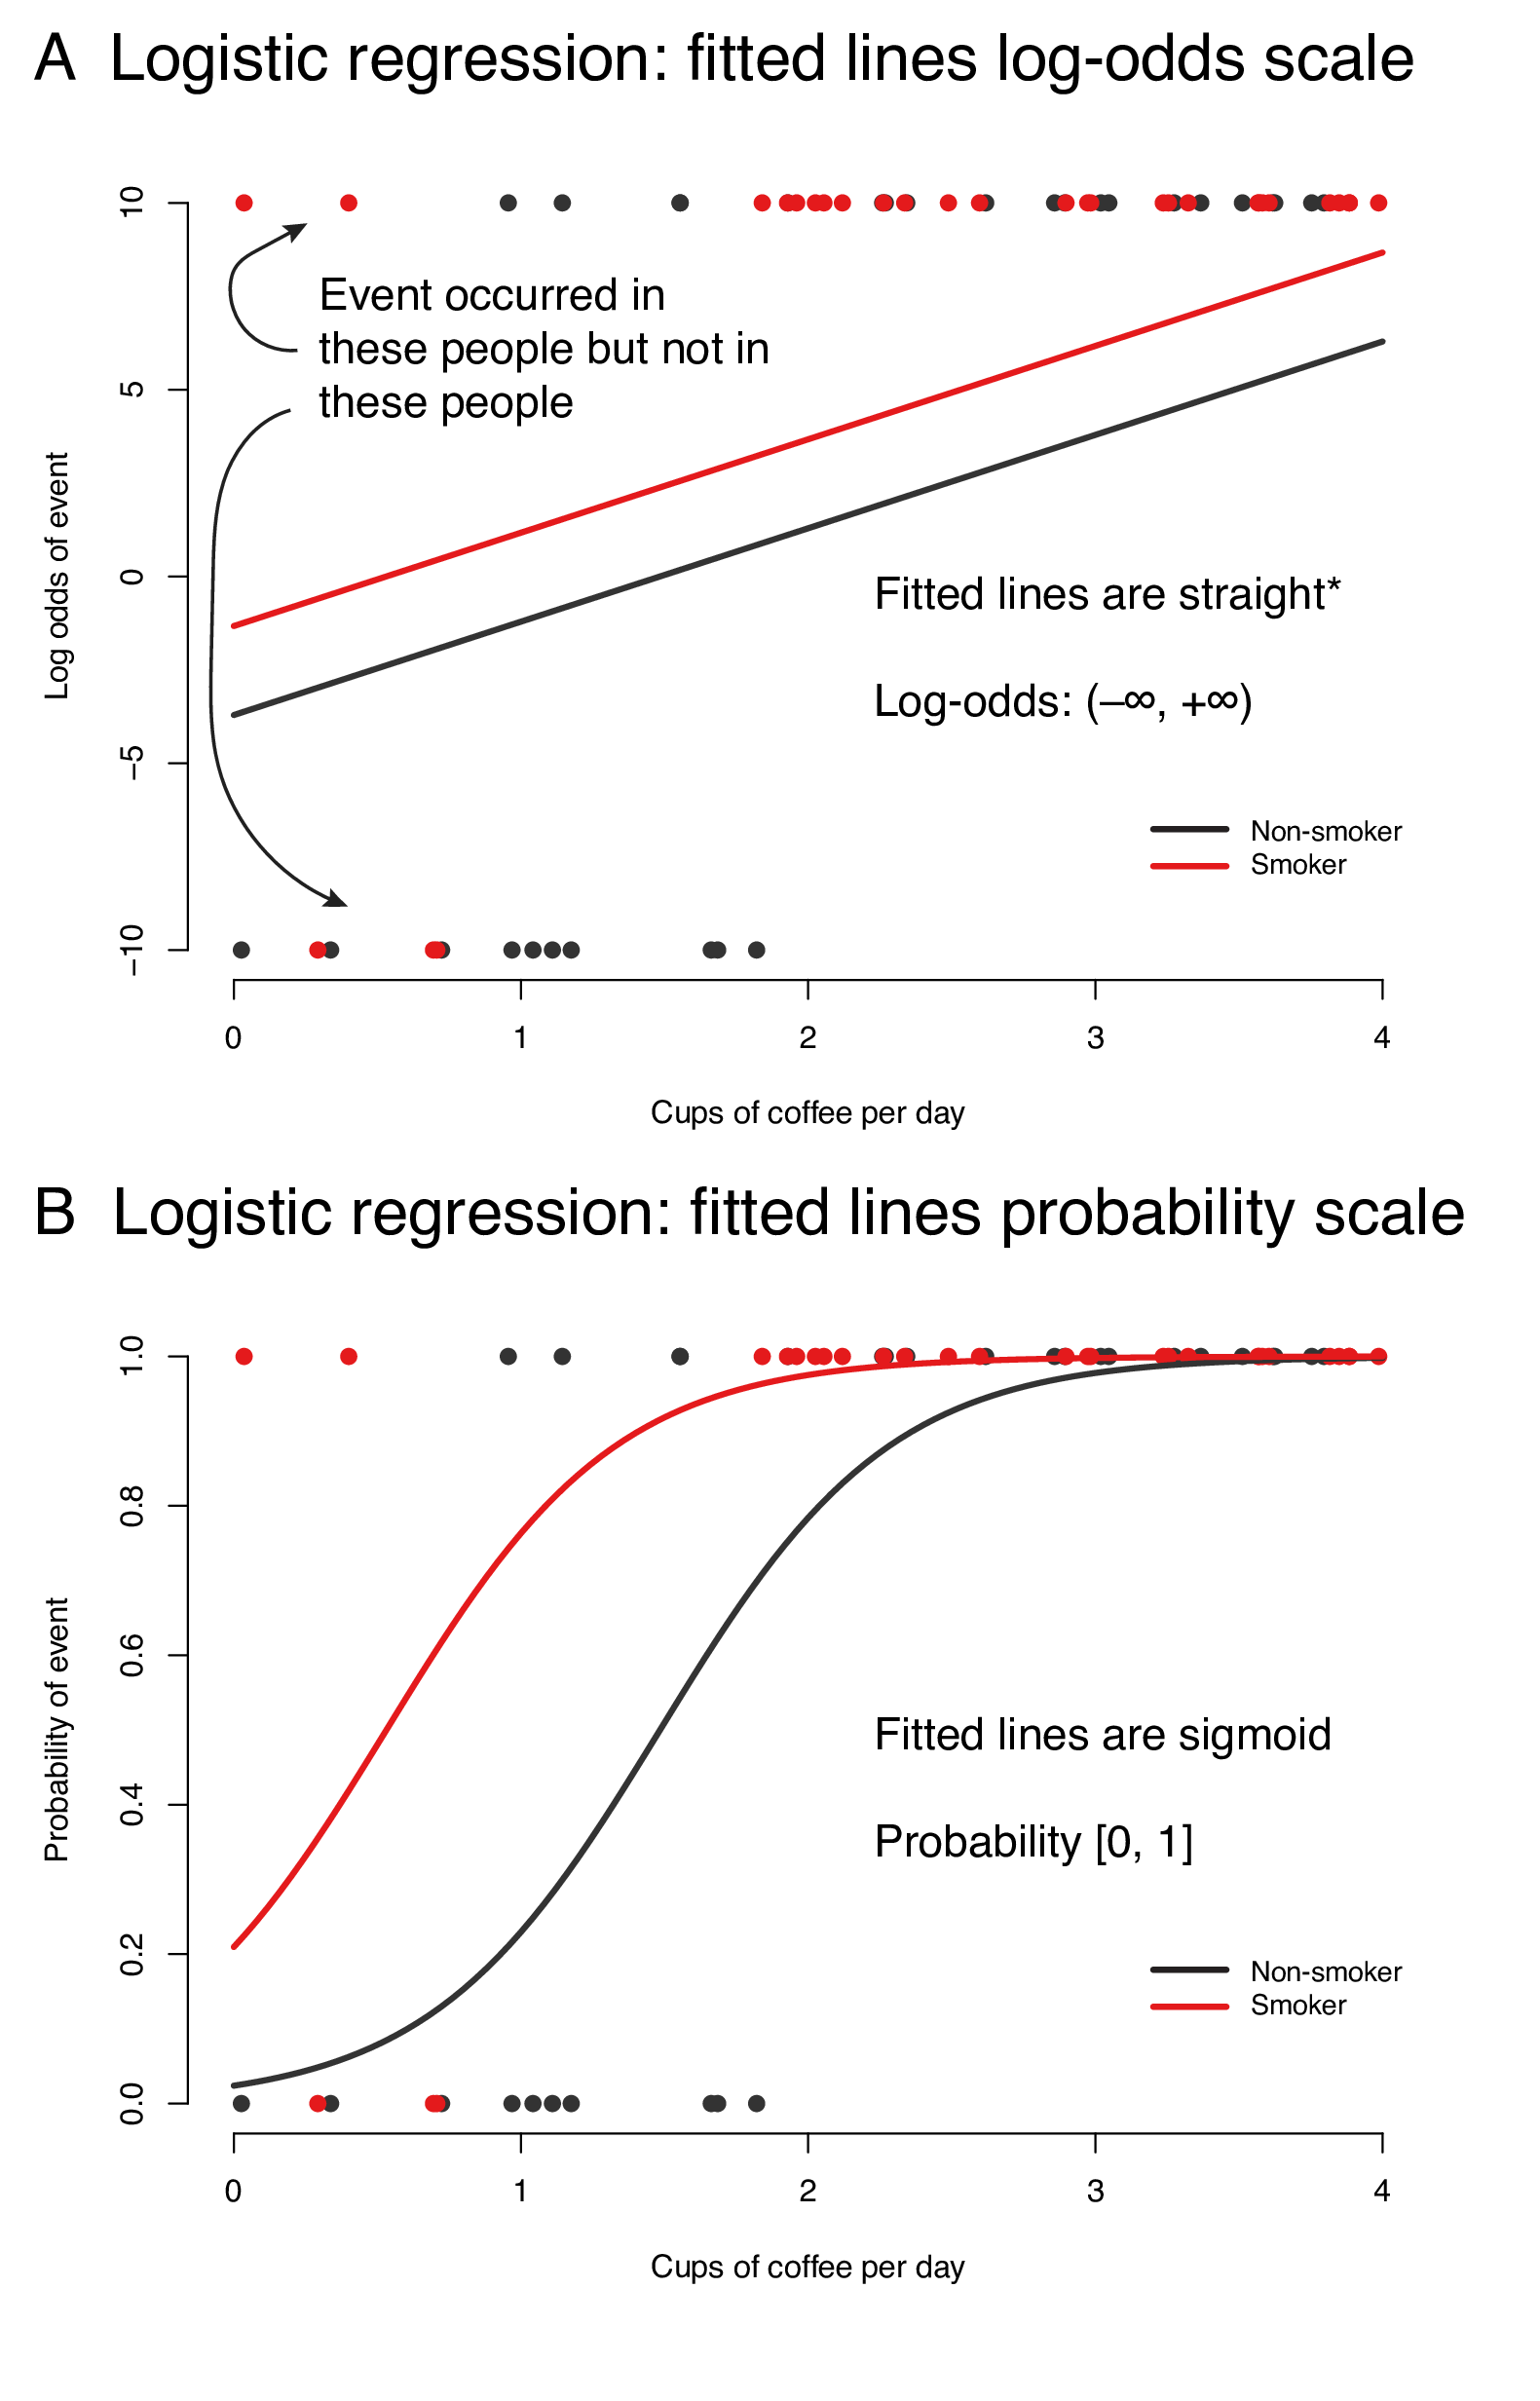 A logistic regression model of life-time cardiovascular event occurrence by coffee consumption stratified by smoking (simulated data). Fitted lines plotted on the log-odds scale (A) and probability scale (B). *lines are straight when no polynomials or splines are included in regression. 